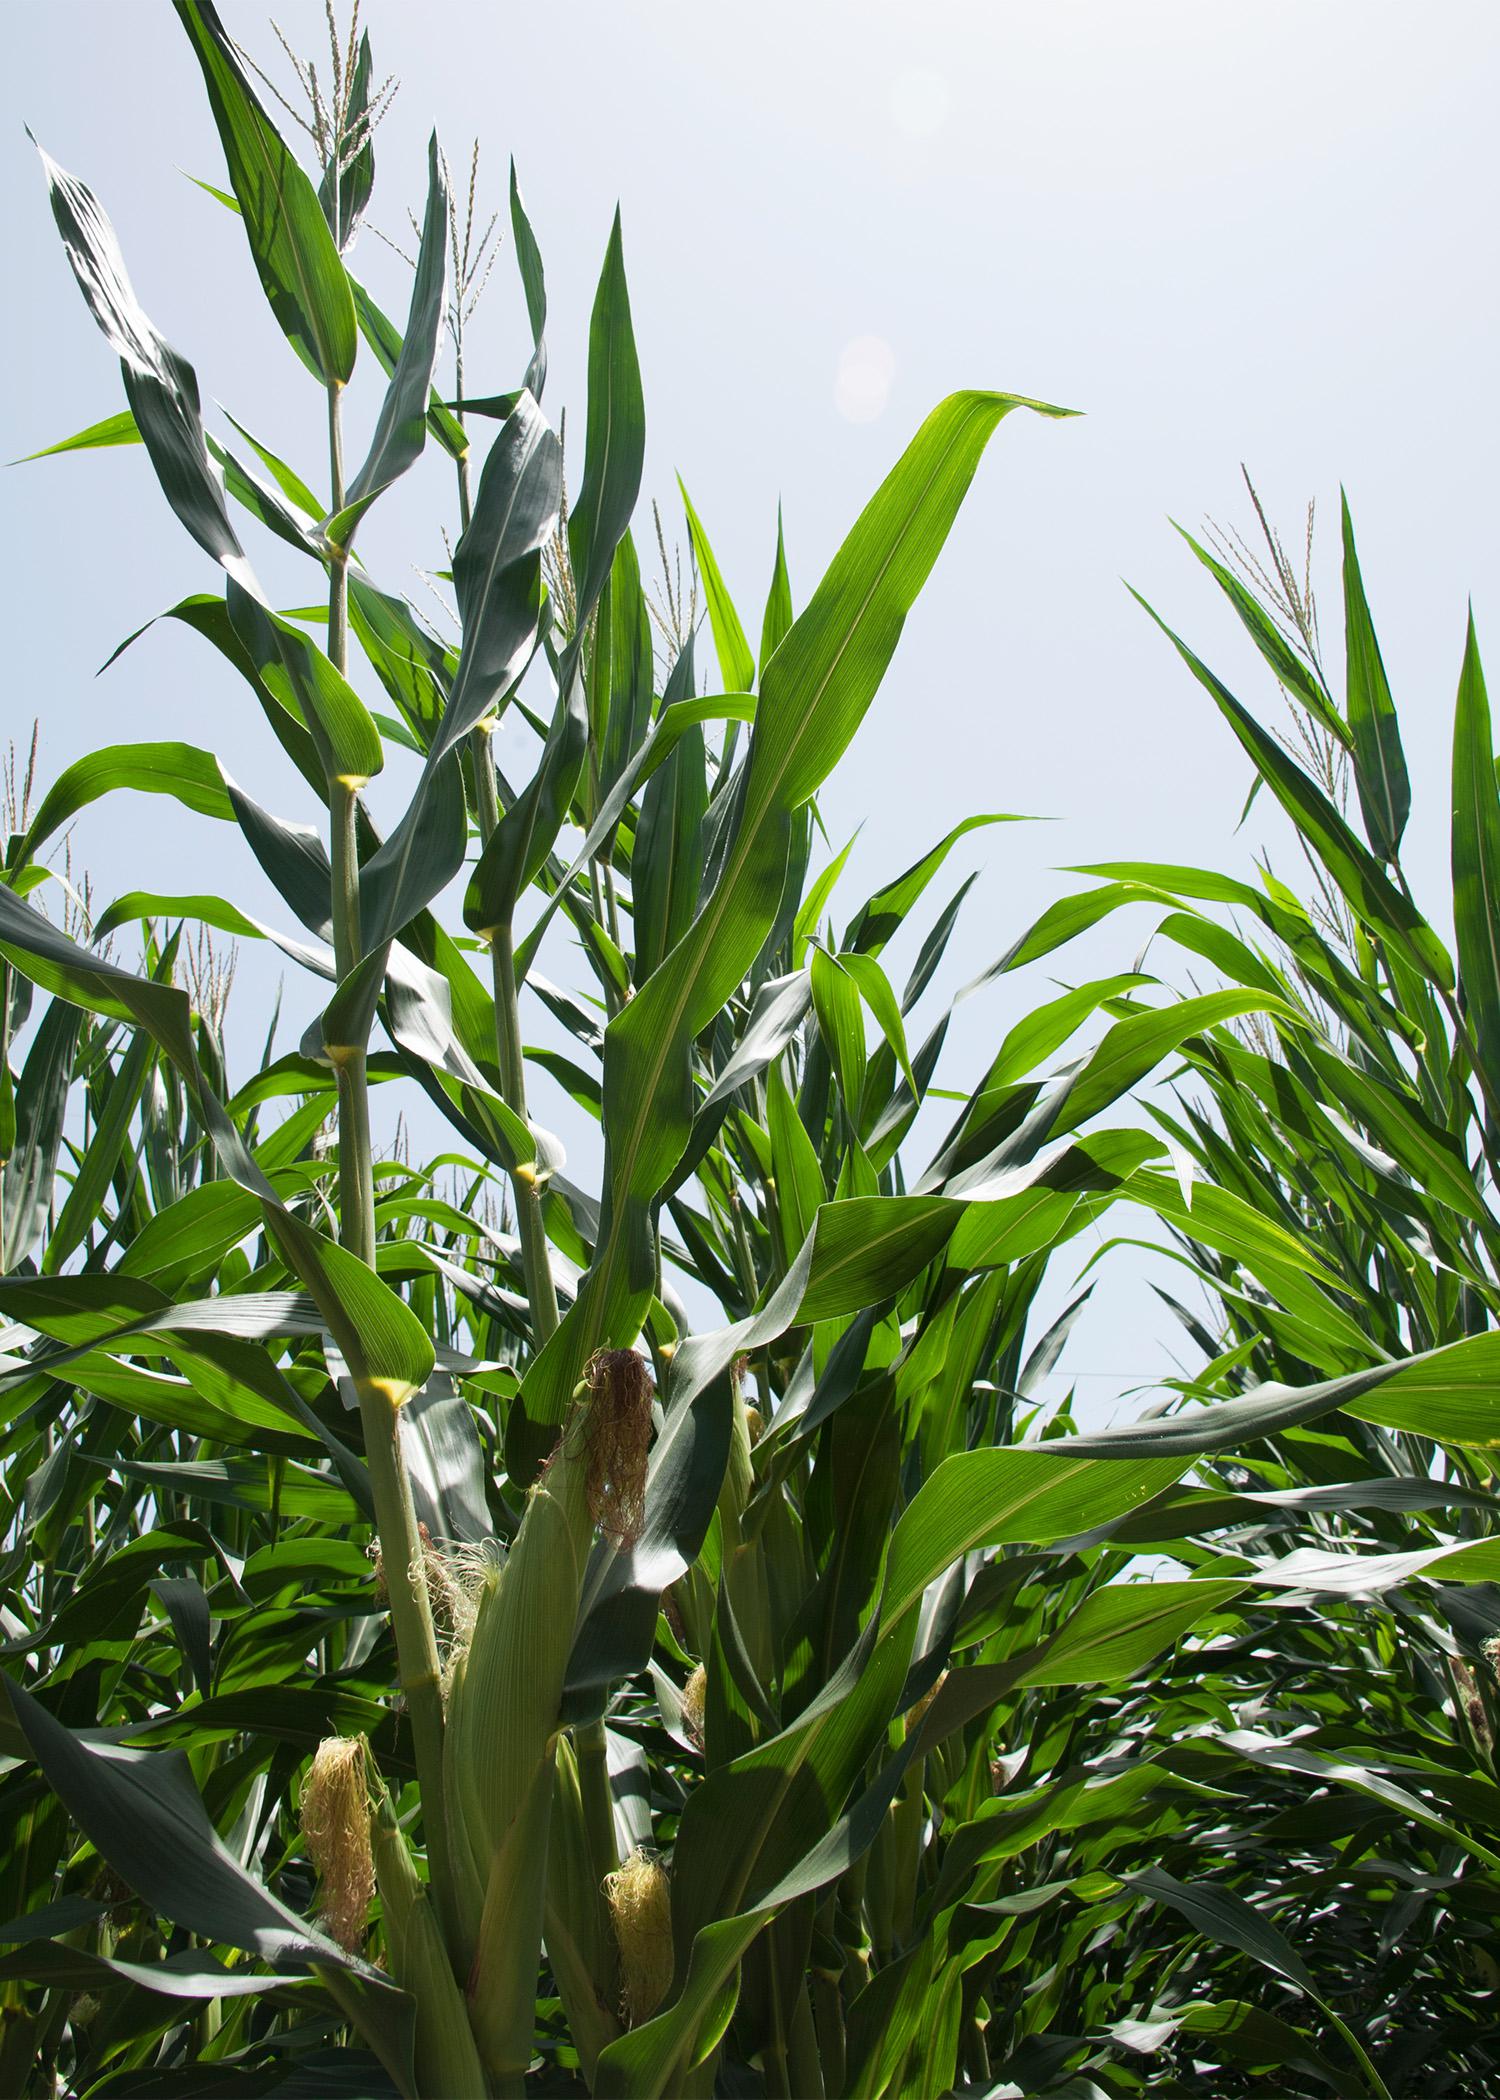 Corn acreage is down in Mississippi this year, but the other major row crops saw increases. This field was photographed July 1, 2014, at Mississippi State University's R.R. Foil Plant Science Research Center in Starkville, Mississippi. (Photo by MSU Ag Communications/Kat Lawrence)